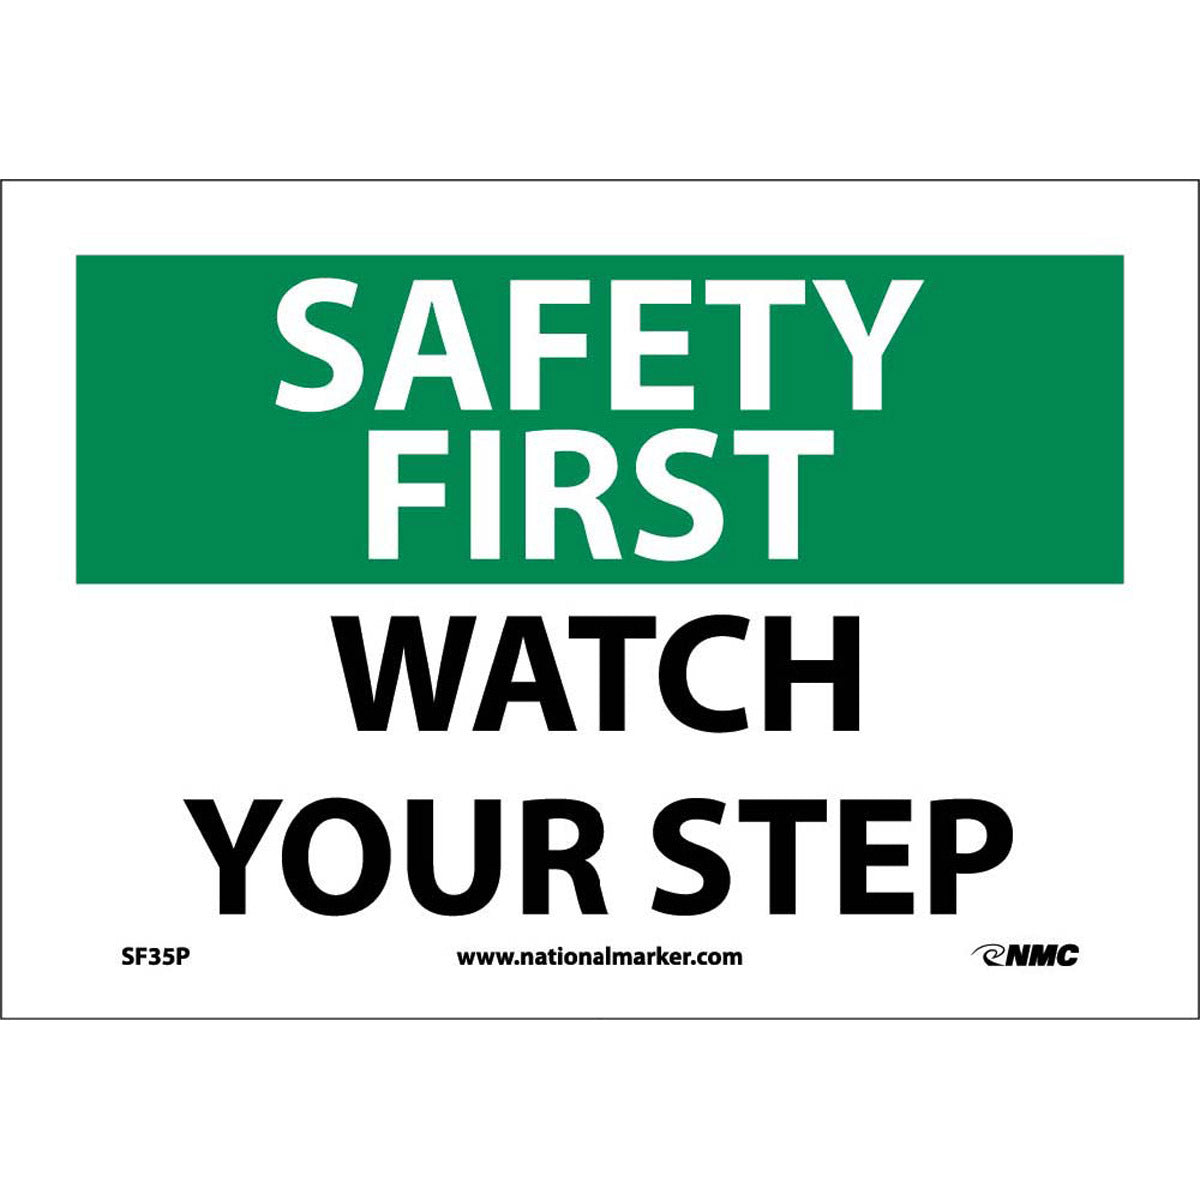 NM 7" X 10" White .0045" Pressure Sensitive Vinyl Safety Sign "SAFETY FIRST WATCH YOUR STEP"